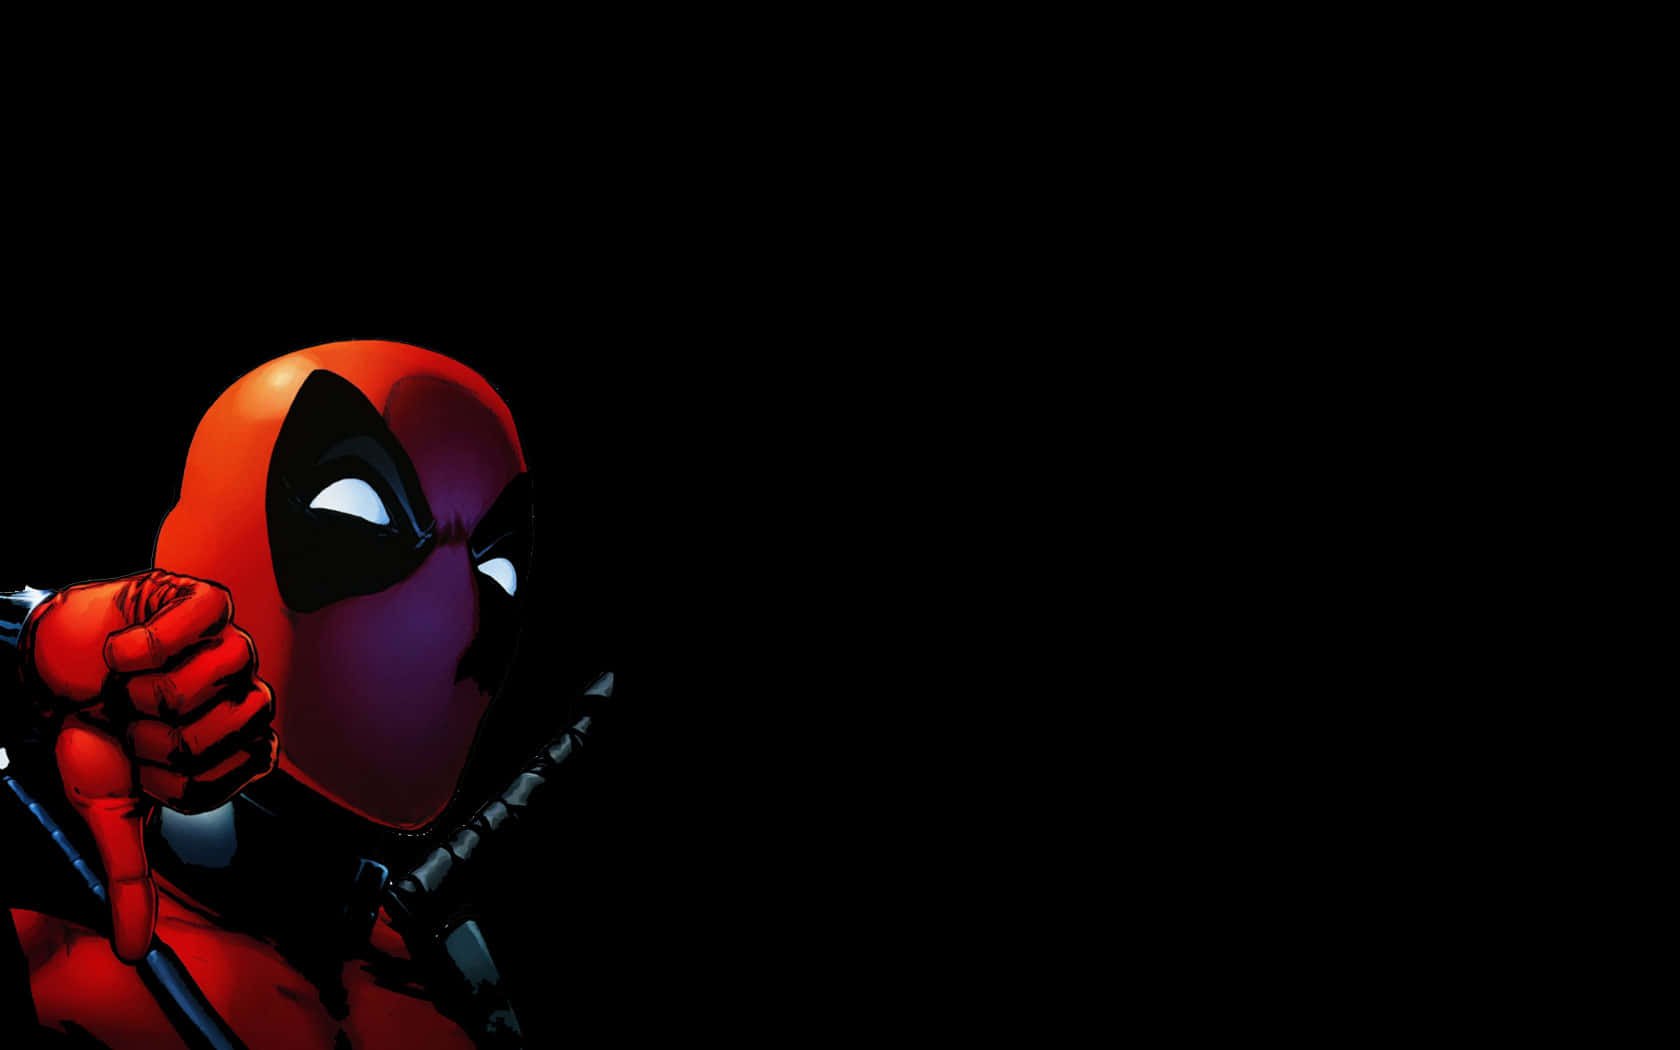 Get ready for an action-packed adventure with Black Deadpool! Wallpaper